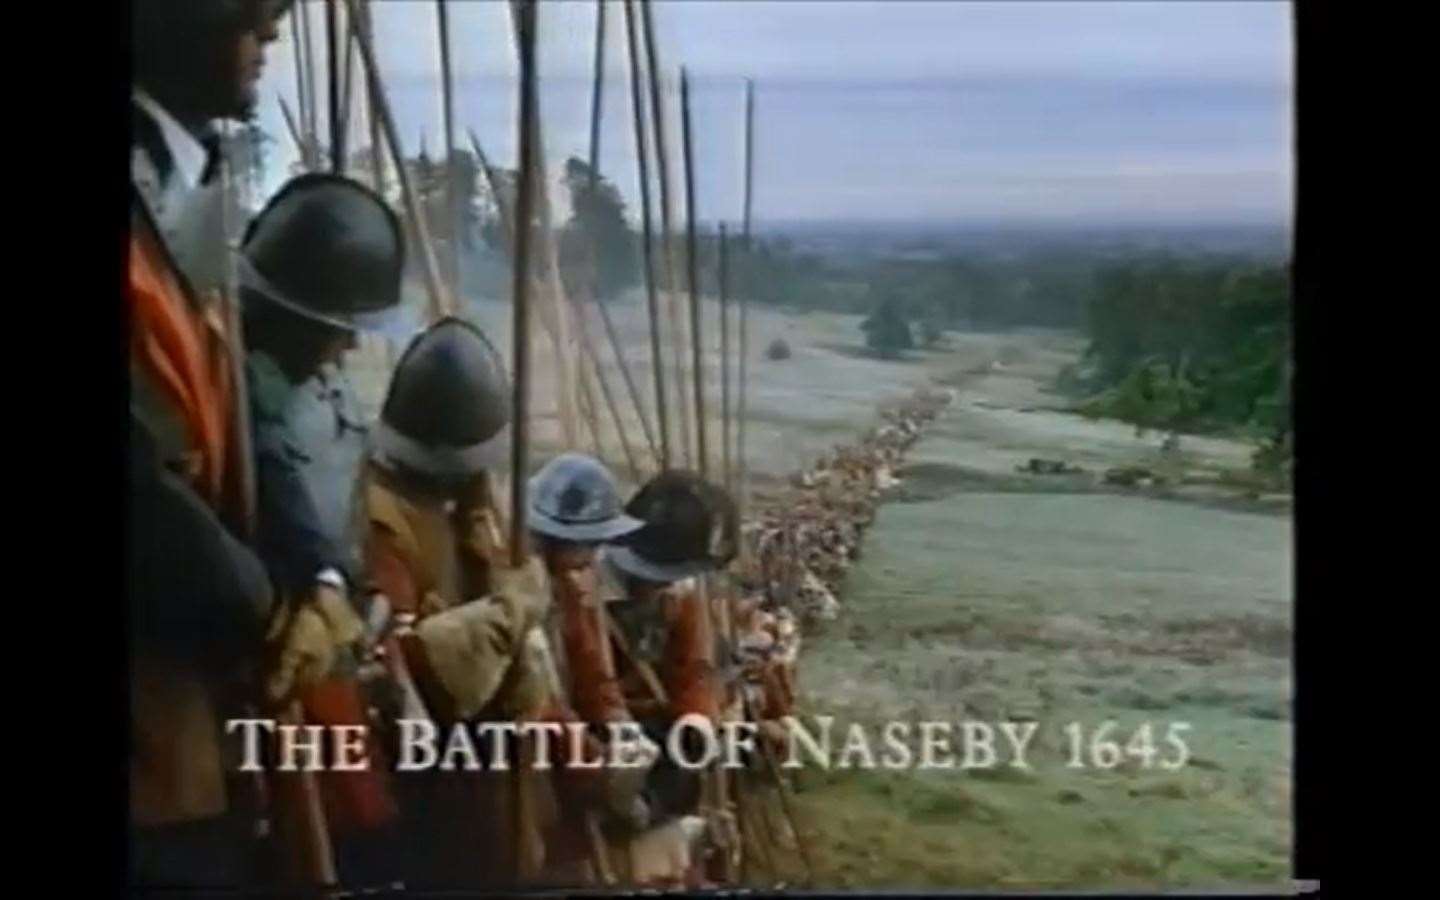 This famous Weetabix advert recreating an alternative version of the Battle of Naseby was filmed near Boughton Monchelsea in 1989